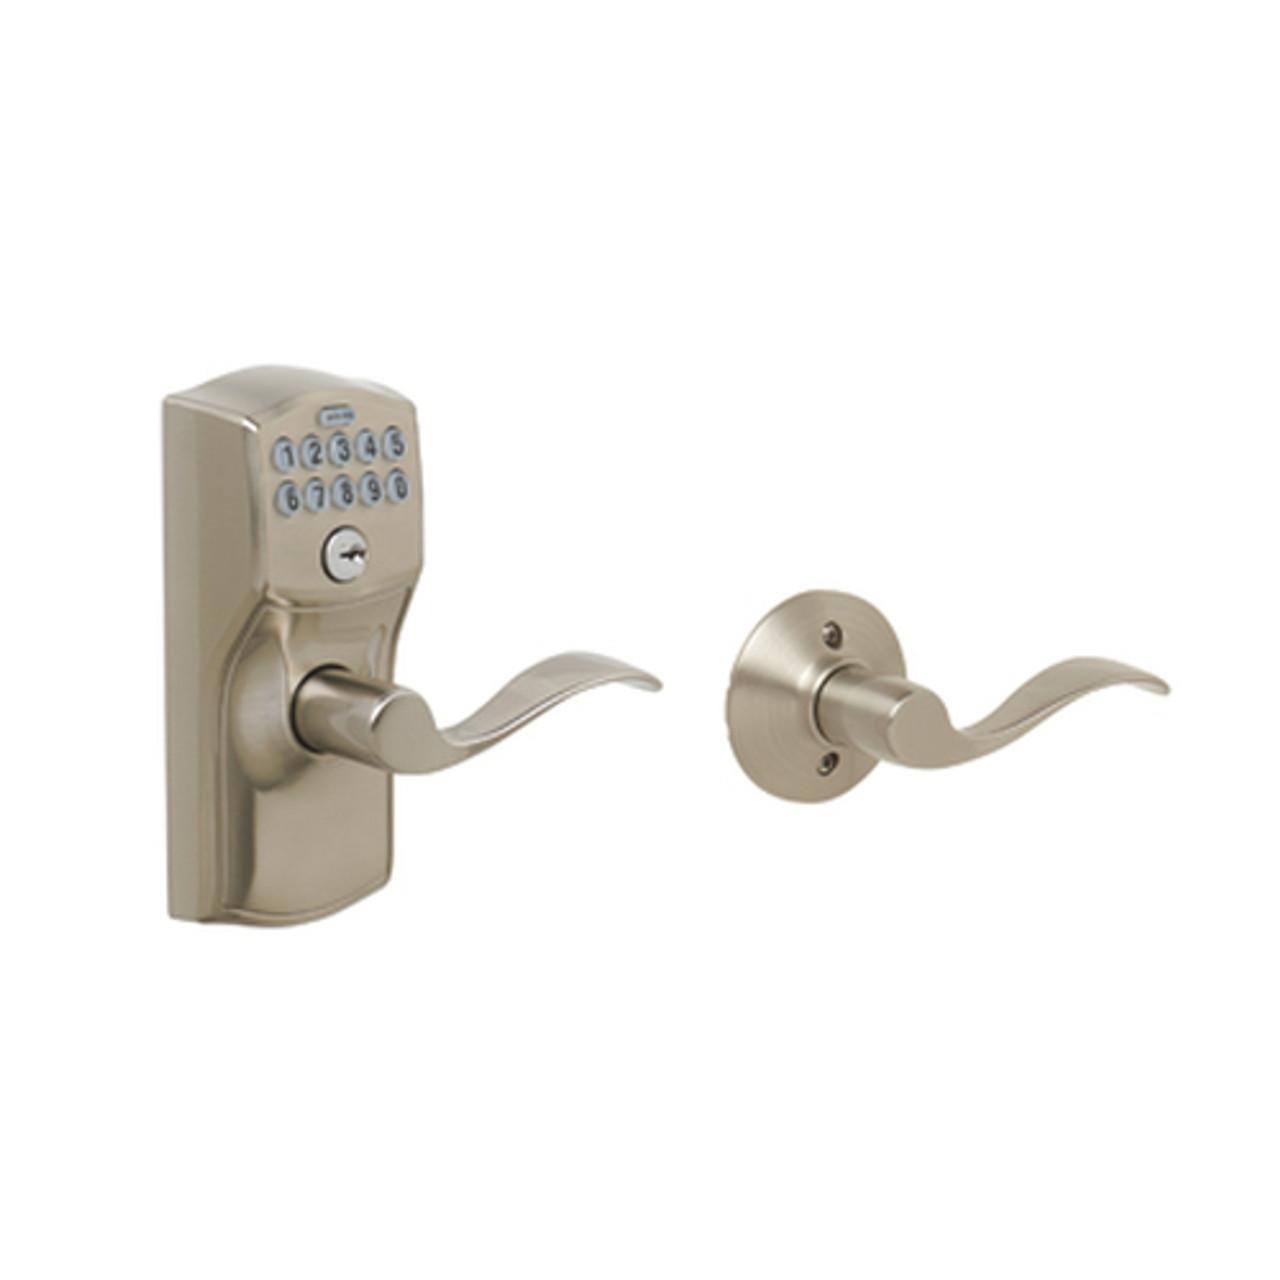 SCHLAGE Satin Nickel FE595 CAM 619 ACC Camelot Keypad Entry with